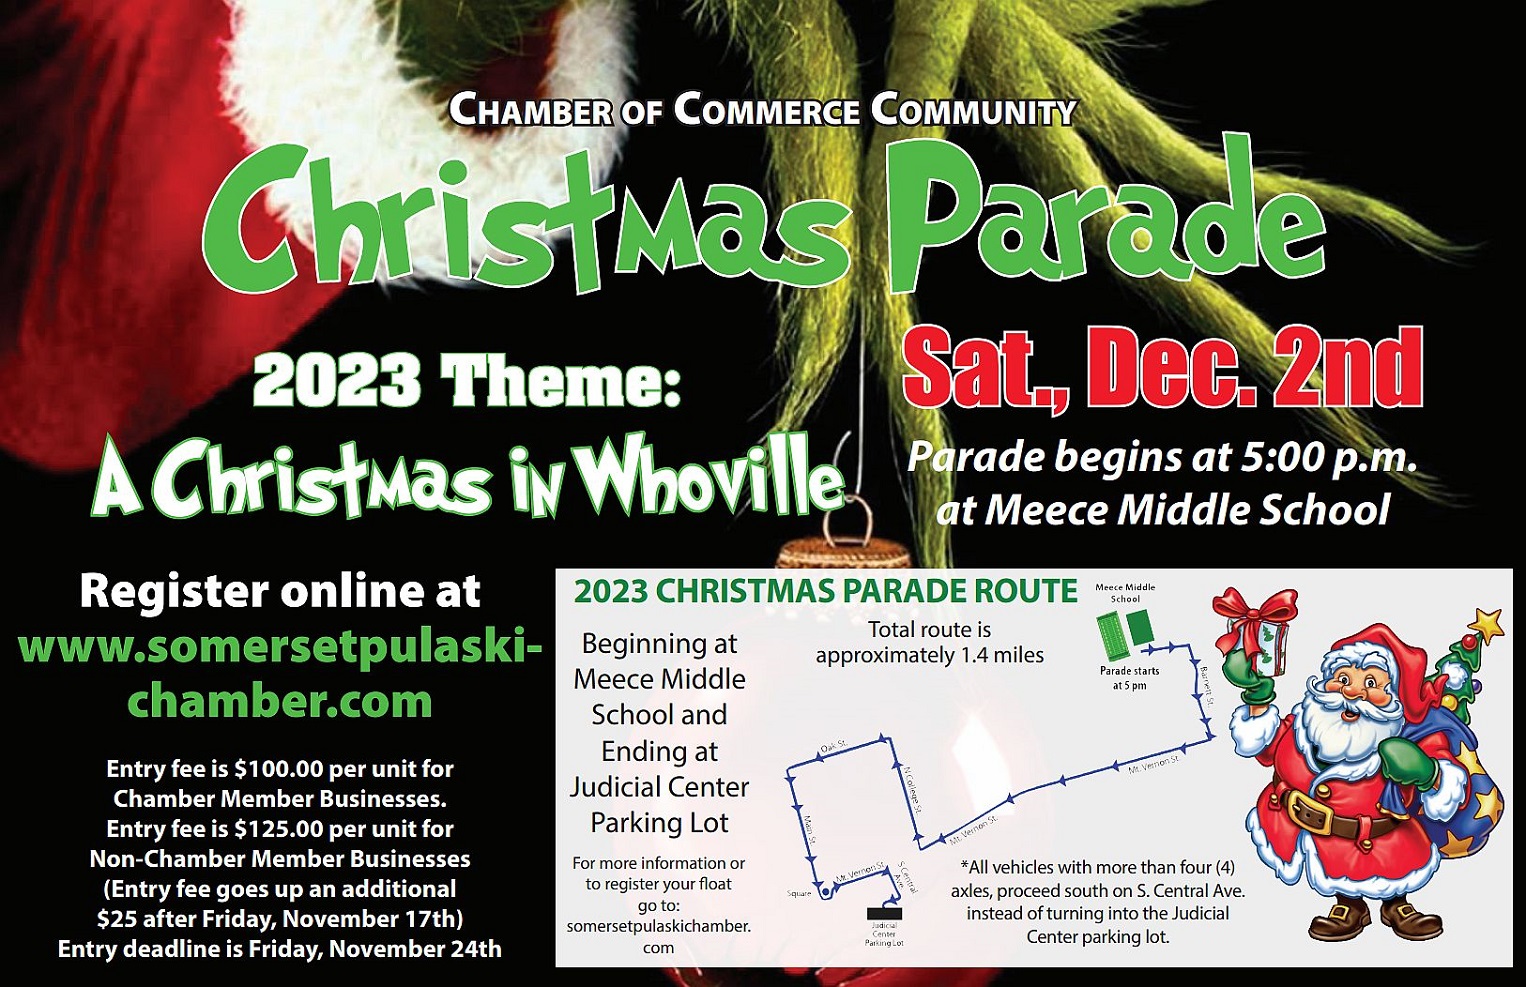 Chamber of Commerce Annual Christmas Parade 2023 "A Christmas in